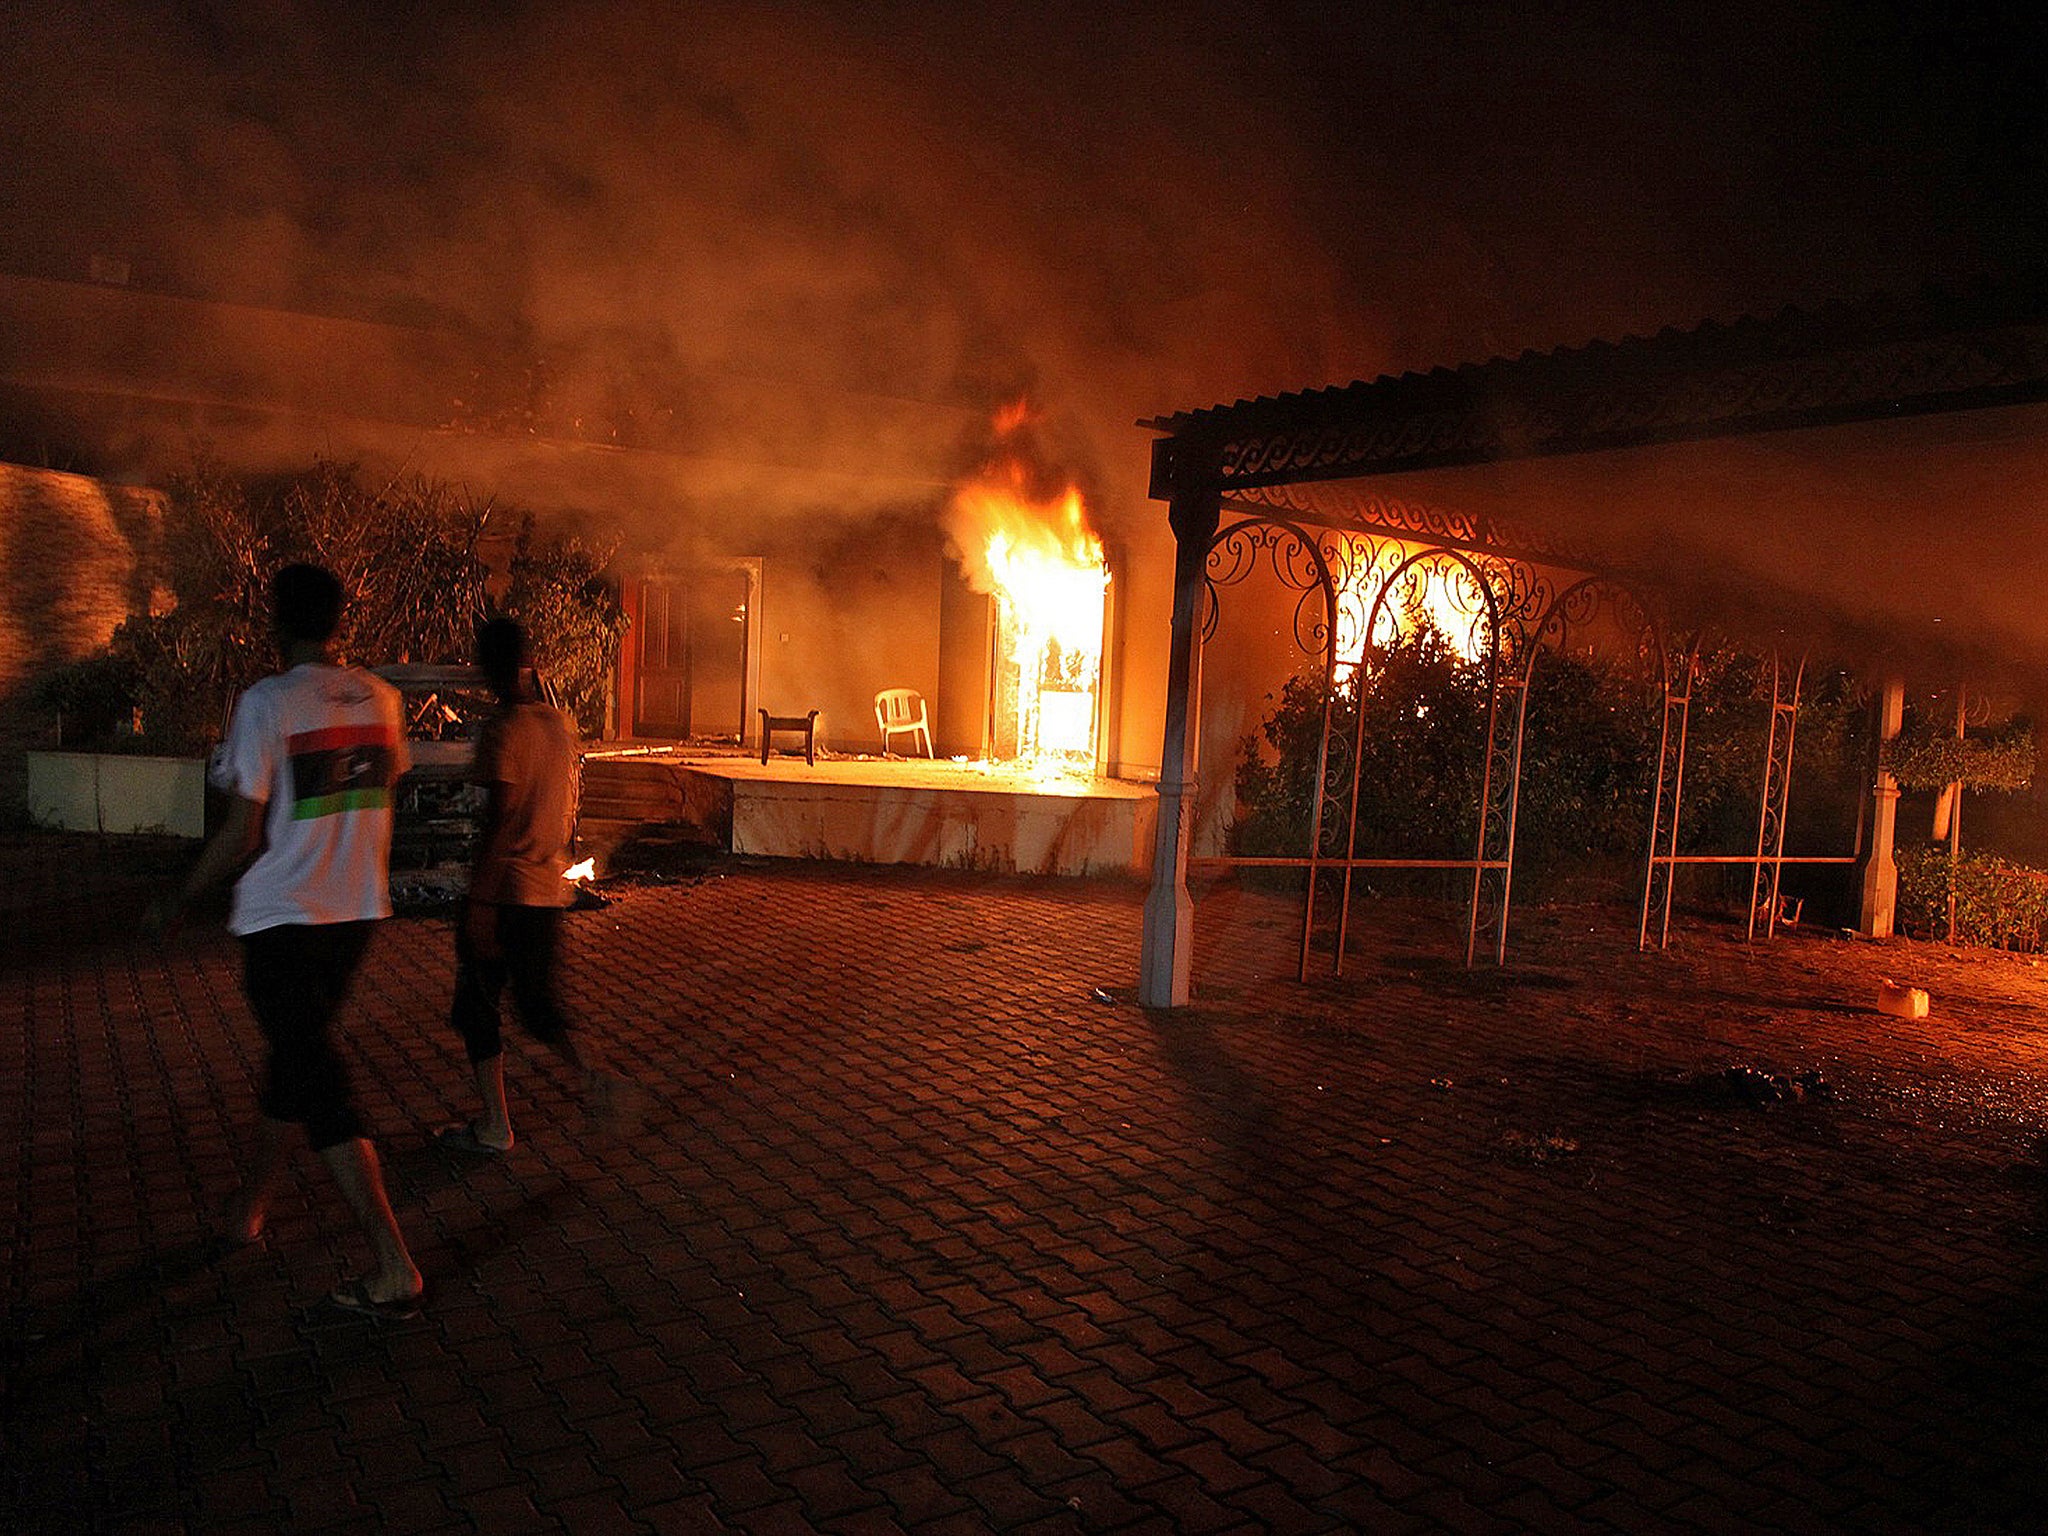 &#13;
The US consulate in Benghazi was attacked on September 11, 2012, setting fire to the building and killing four Americans &#13;